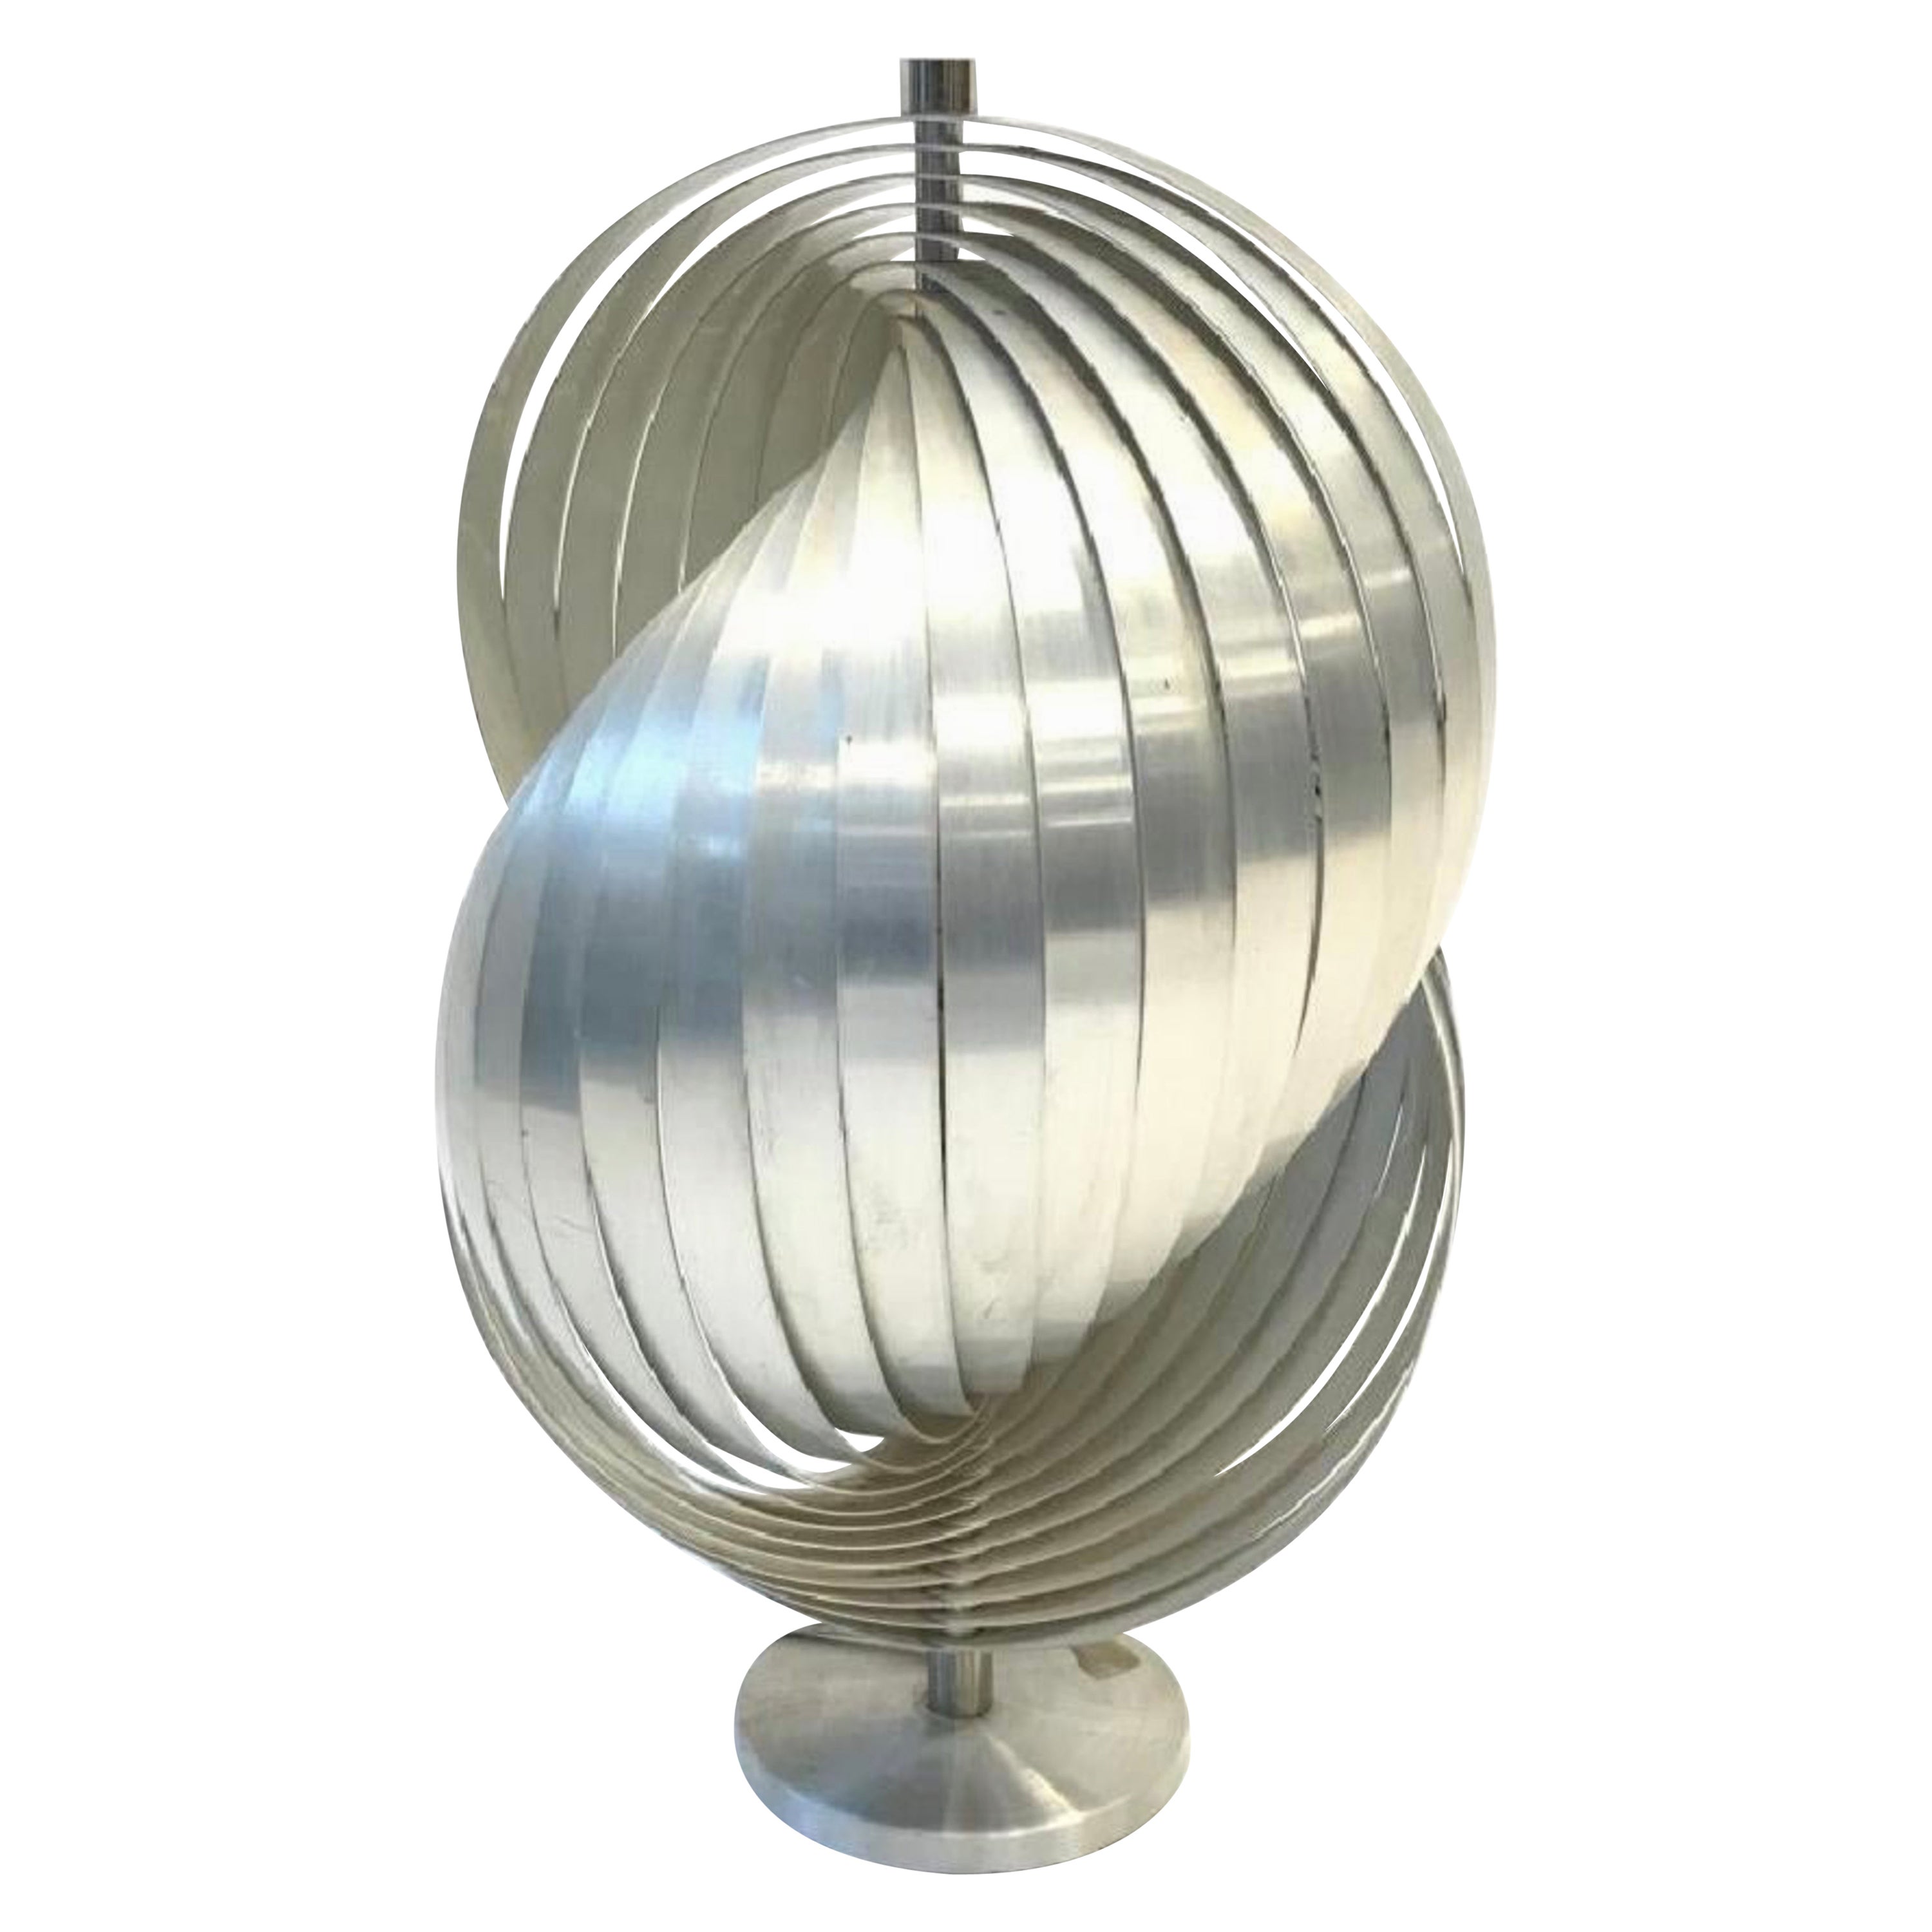 Spiral Table Lamp, Henri Mathieu, France 1970, Steel, Space Age Mid-Century Vtg